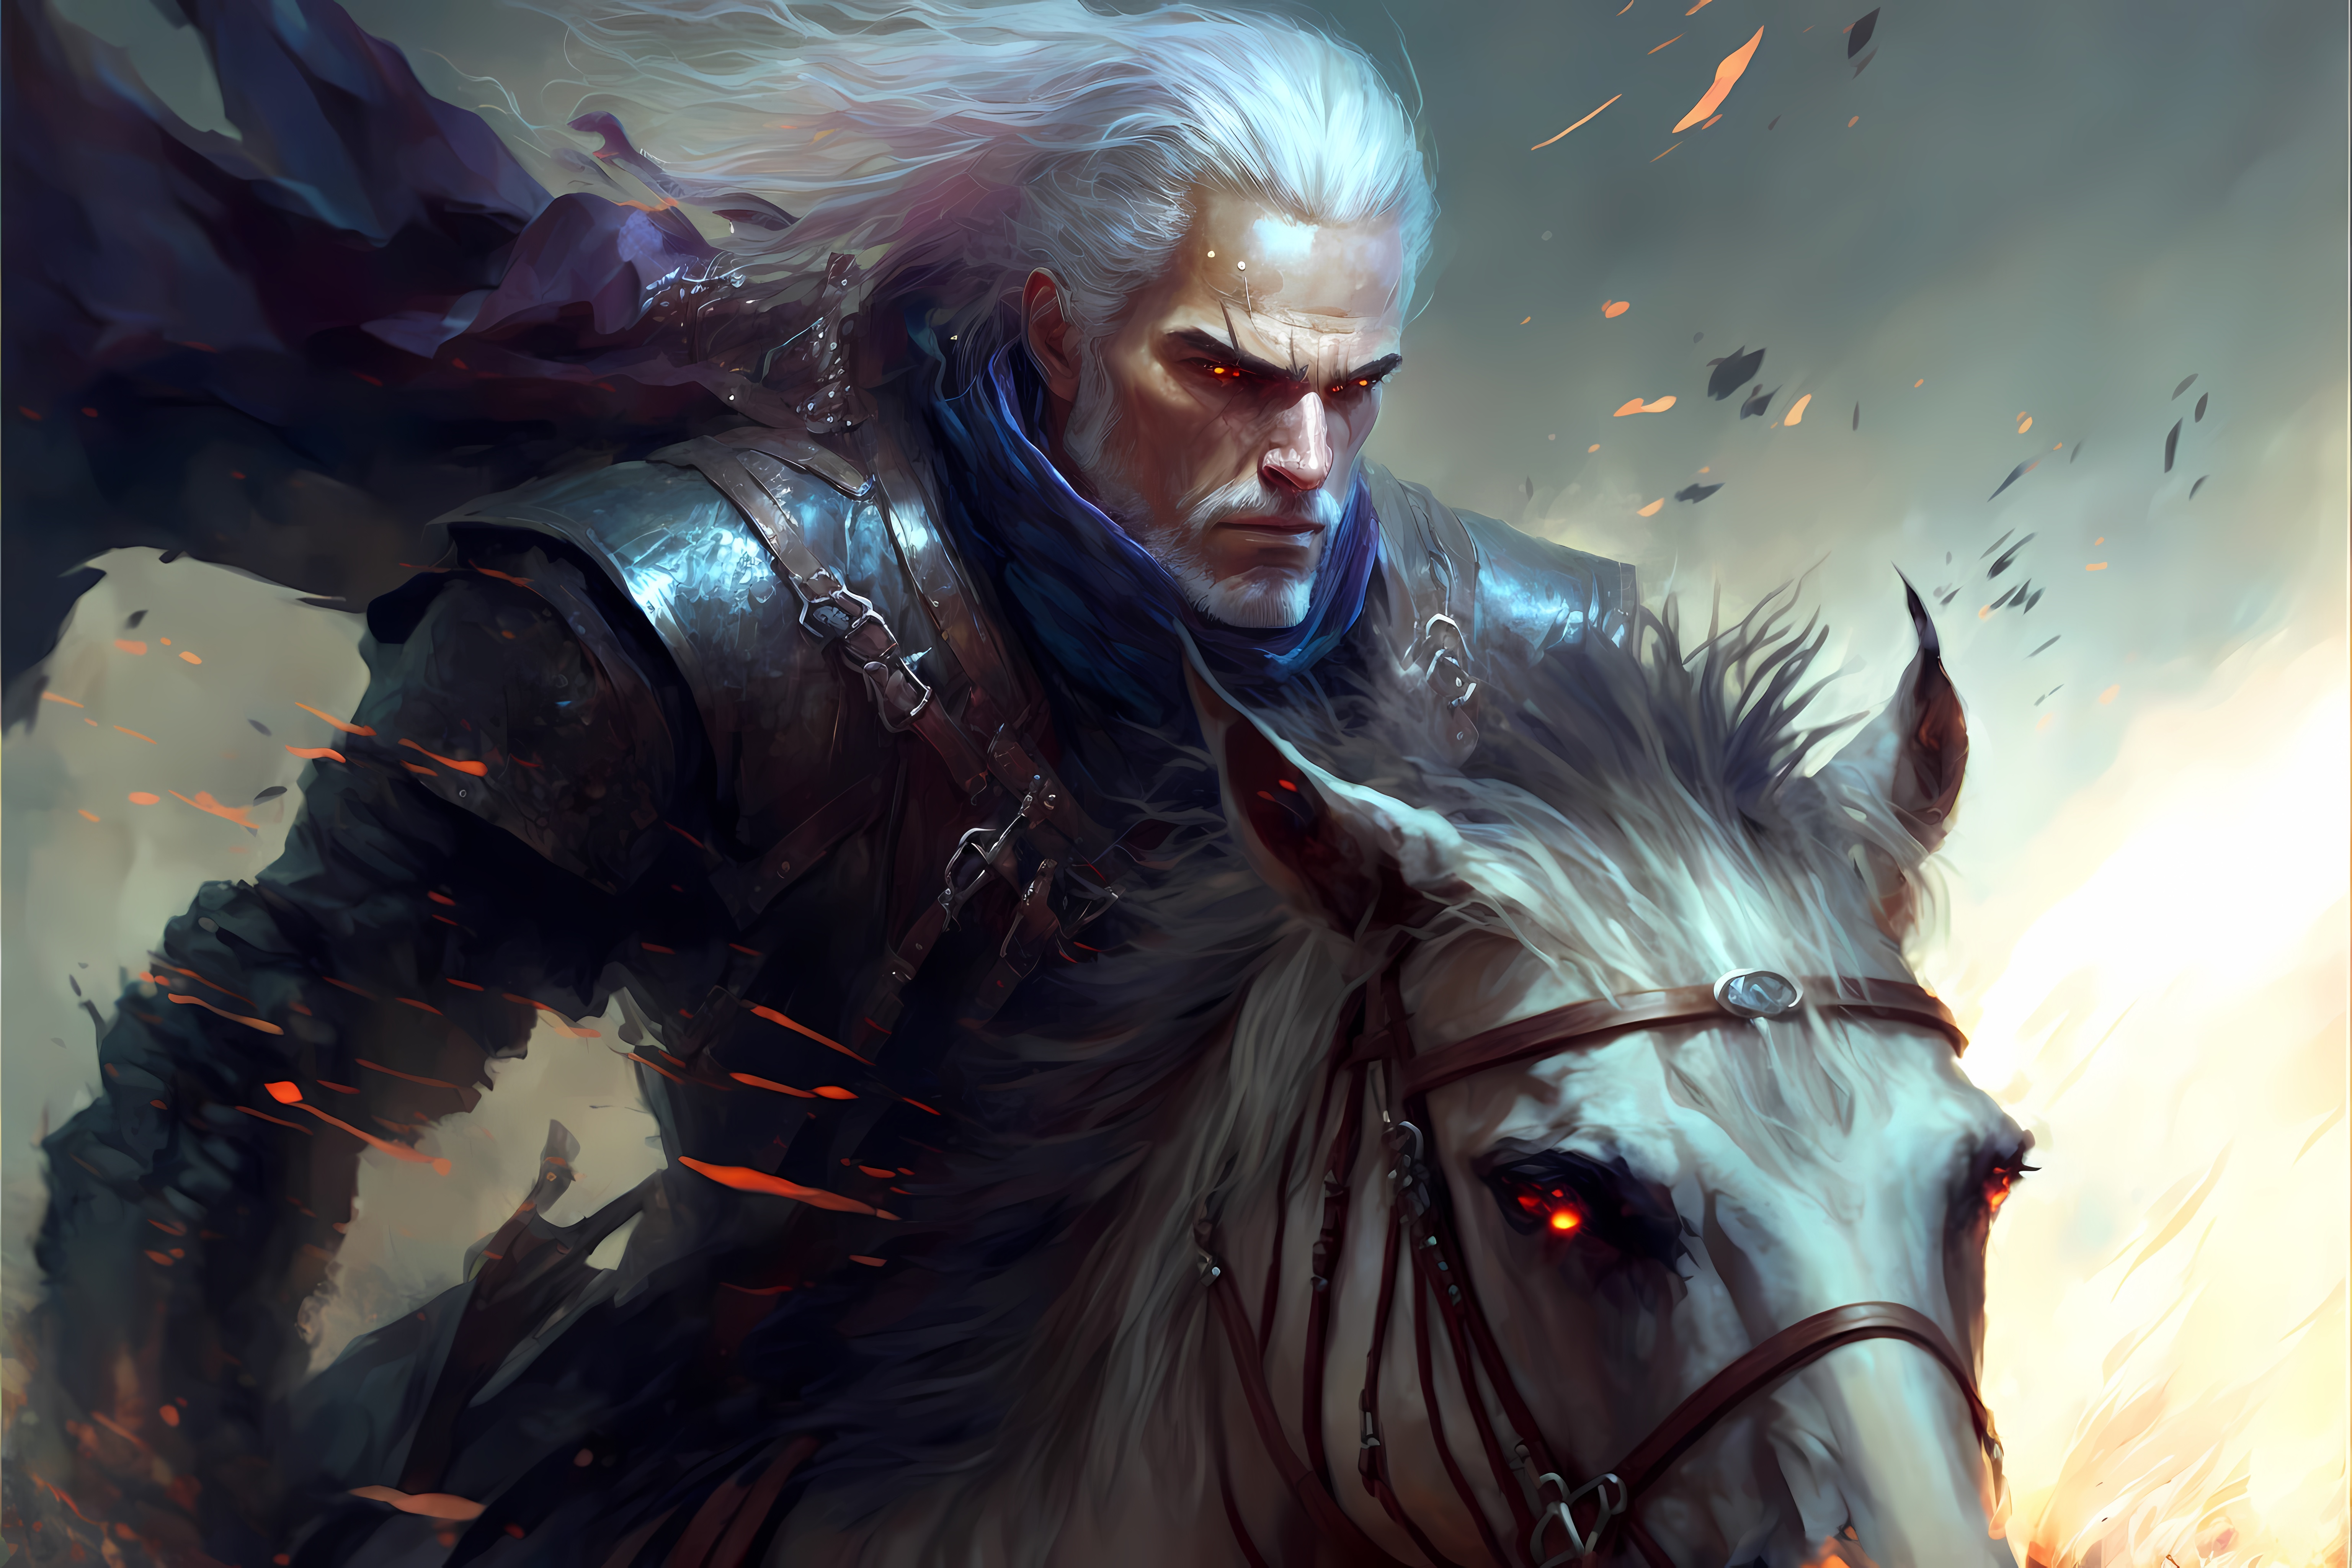 General 6144x4096 The Witcher Geralt of Rivia AI art fantasy art video game characters video game men horse